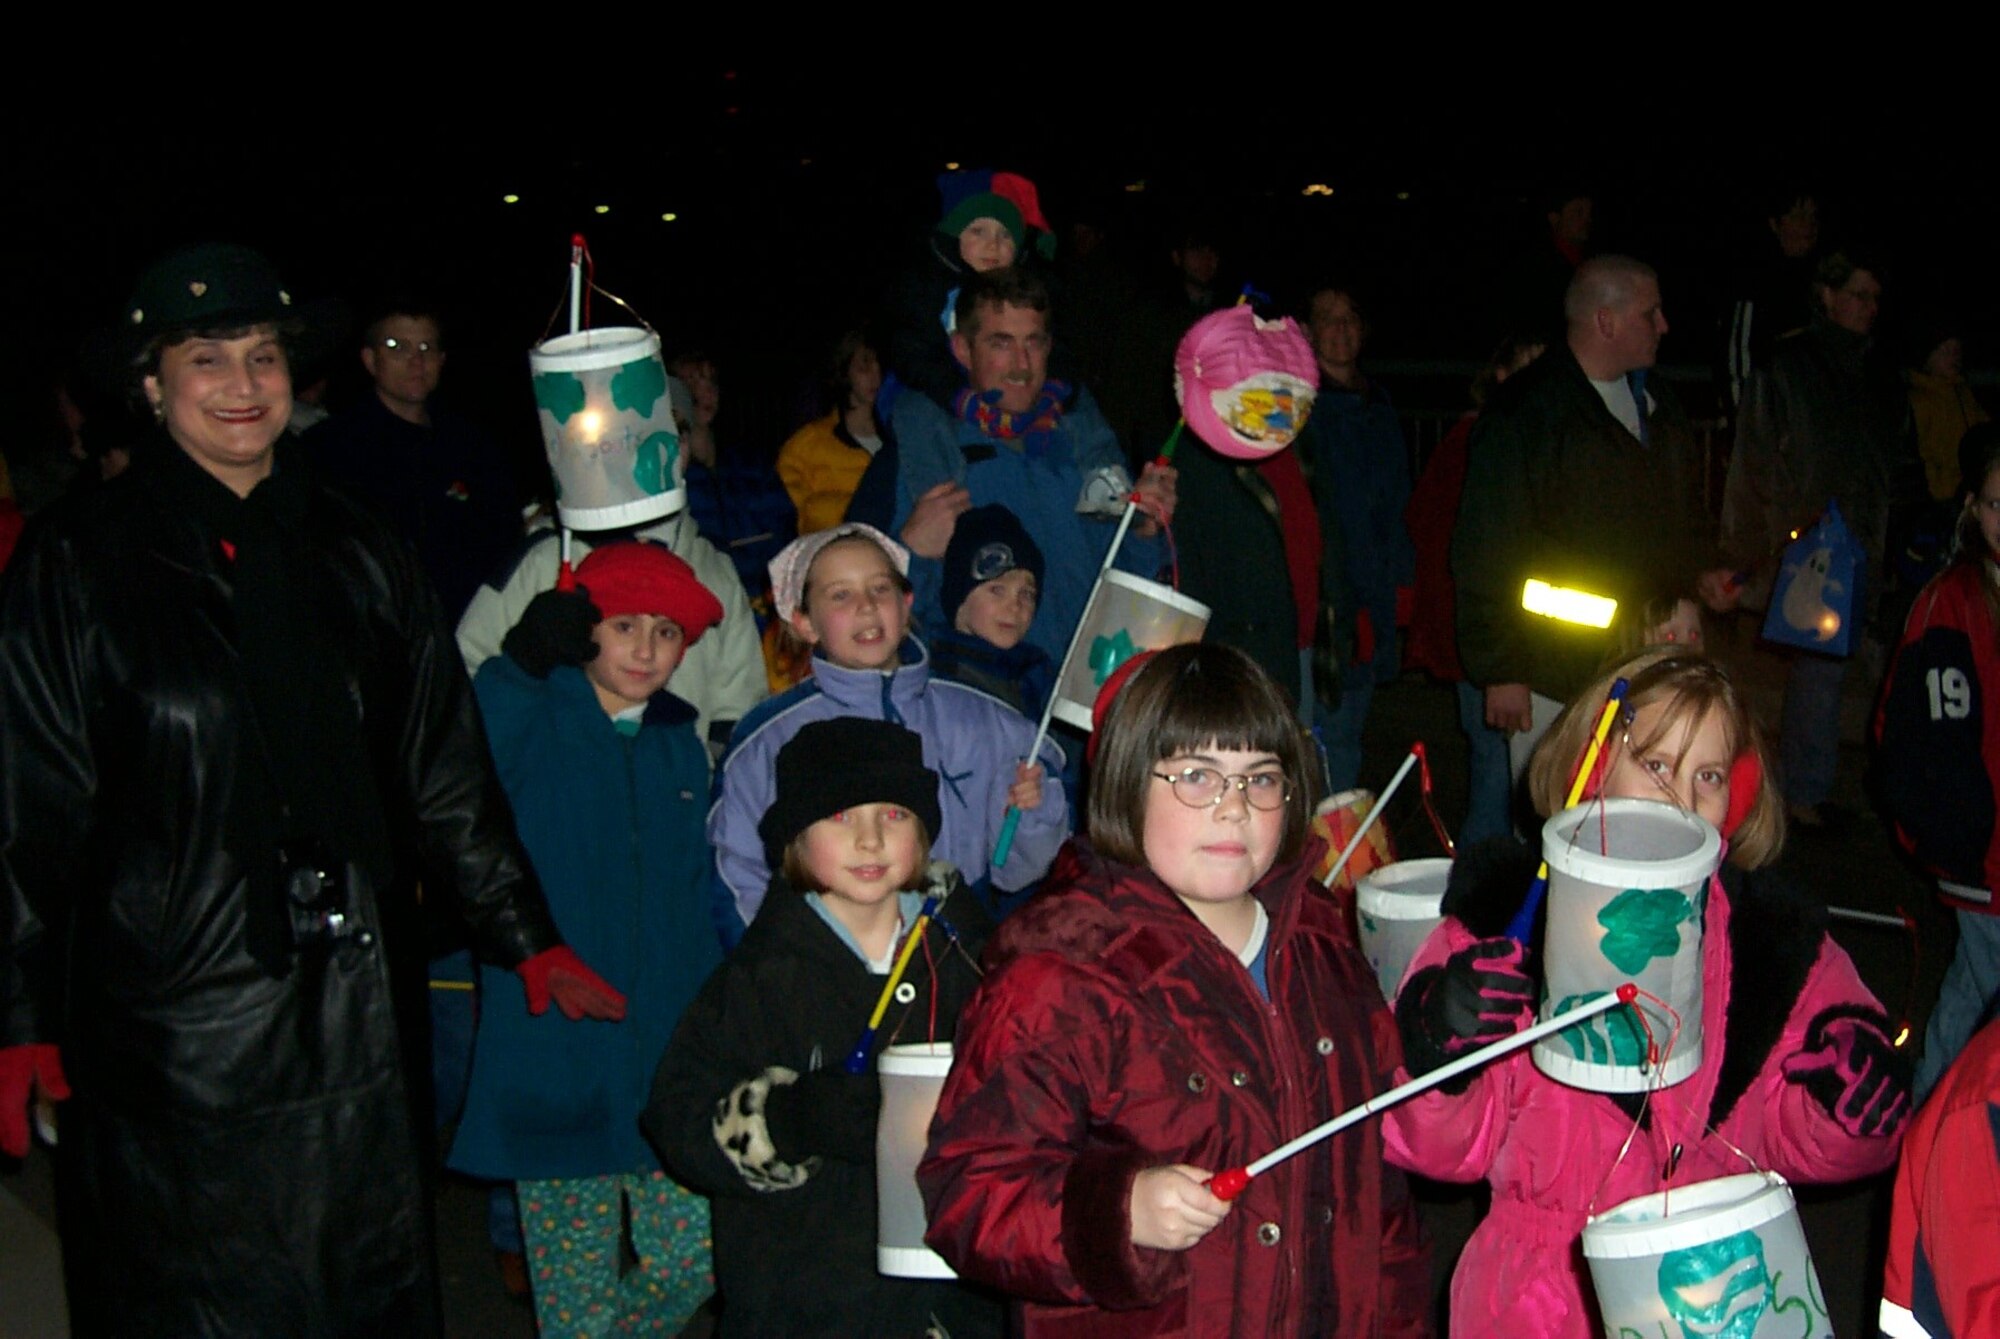 SPANGDAHLEM AIR BASE, Germany-- Local children carry colorful lanterns as they march through the streets of Spangdahlem village in a past Saint Martin procession. This year, parades are scheduled to take place tonight through next week with the dates and times varying from town to town. In some towns, firefighters lead the parade with torches in hand, followed by the town band and a man portraying St. Martin, clad in the uniform of a Roman legionnaire, on horseback. The colorfully illuminated processions end with a huge bonfire. "St. Martin" then encourages the children and hands out large sugar pretzels. The Saint Martin parade is a perfect event for small children with their parents. Local villages invite the American neighbors to participate in this traditional local event. (U.S. Air Force photo by Iris Reiff) 